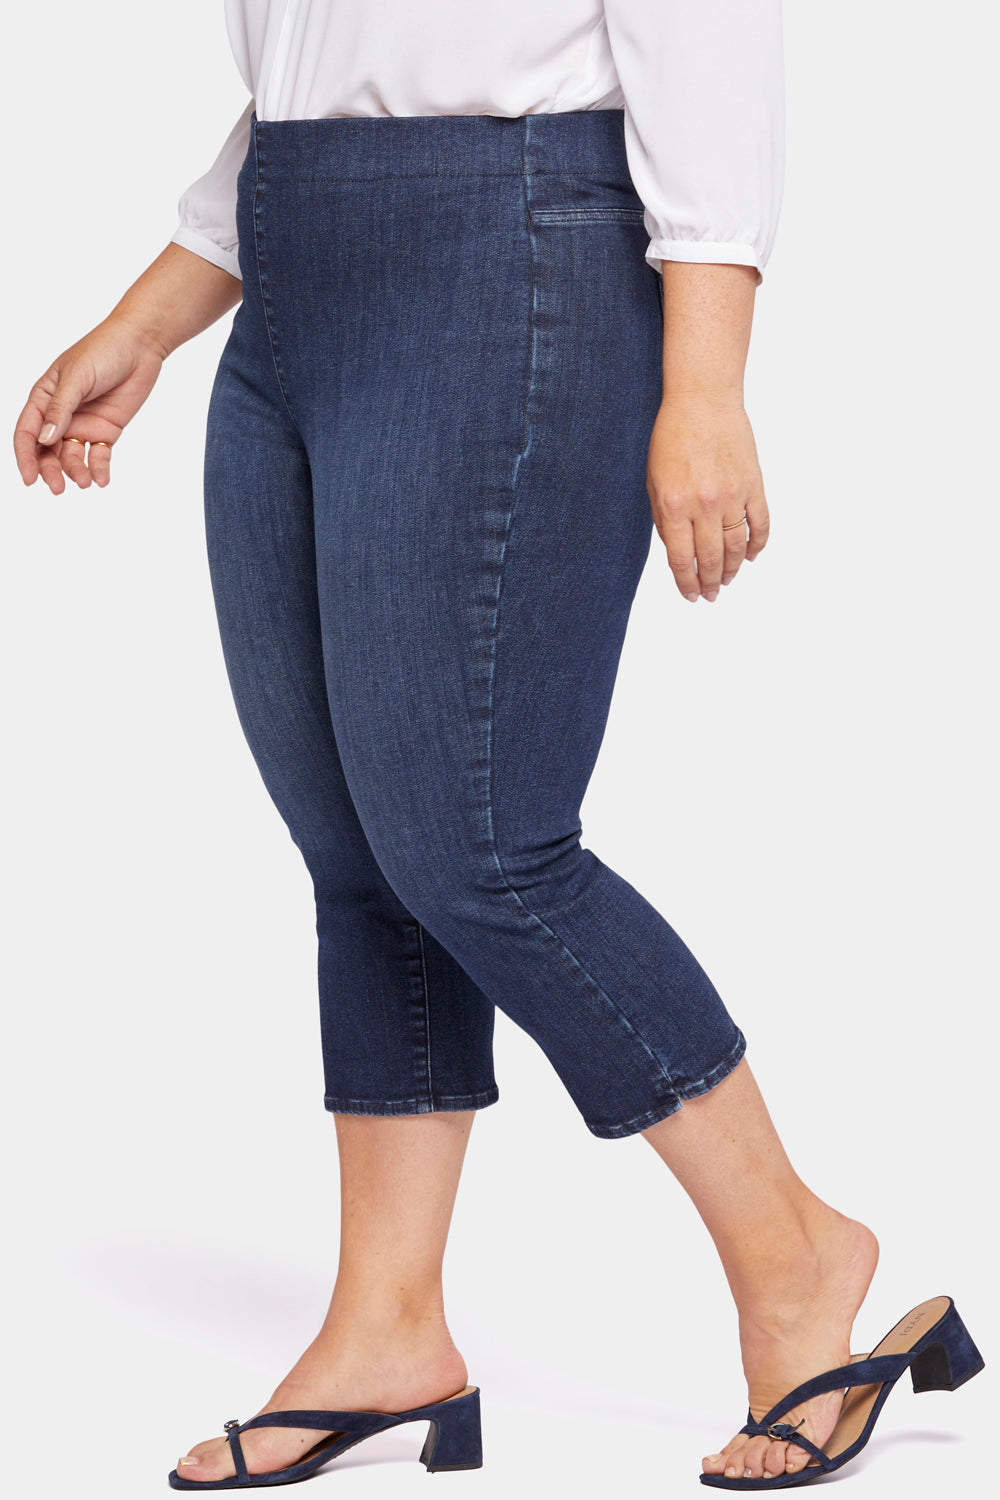 NYDJ Dakota Crop Pull-On Jeans In Plus Size In SpanSpring™ Denim With Side Slits - Mesquite